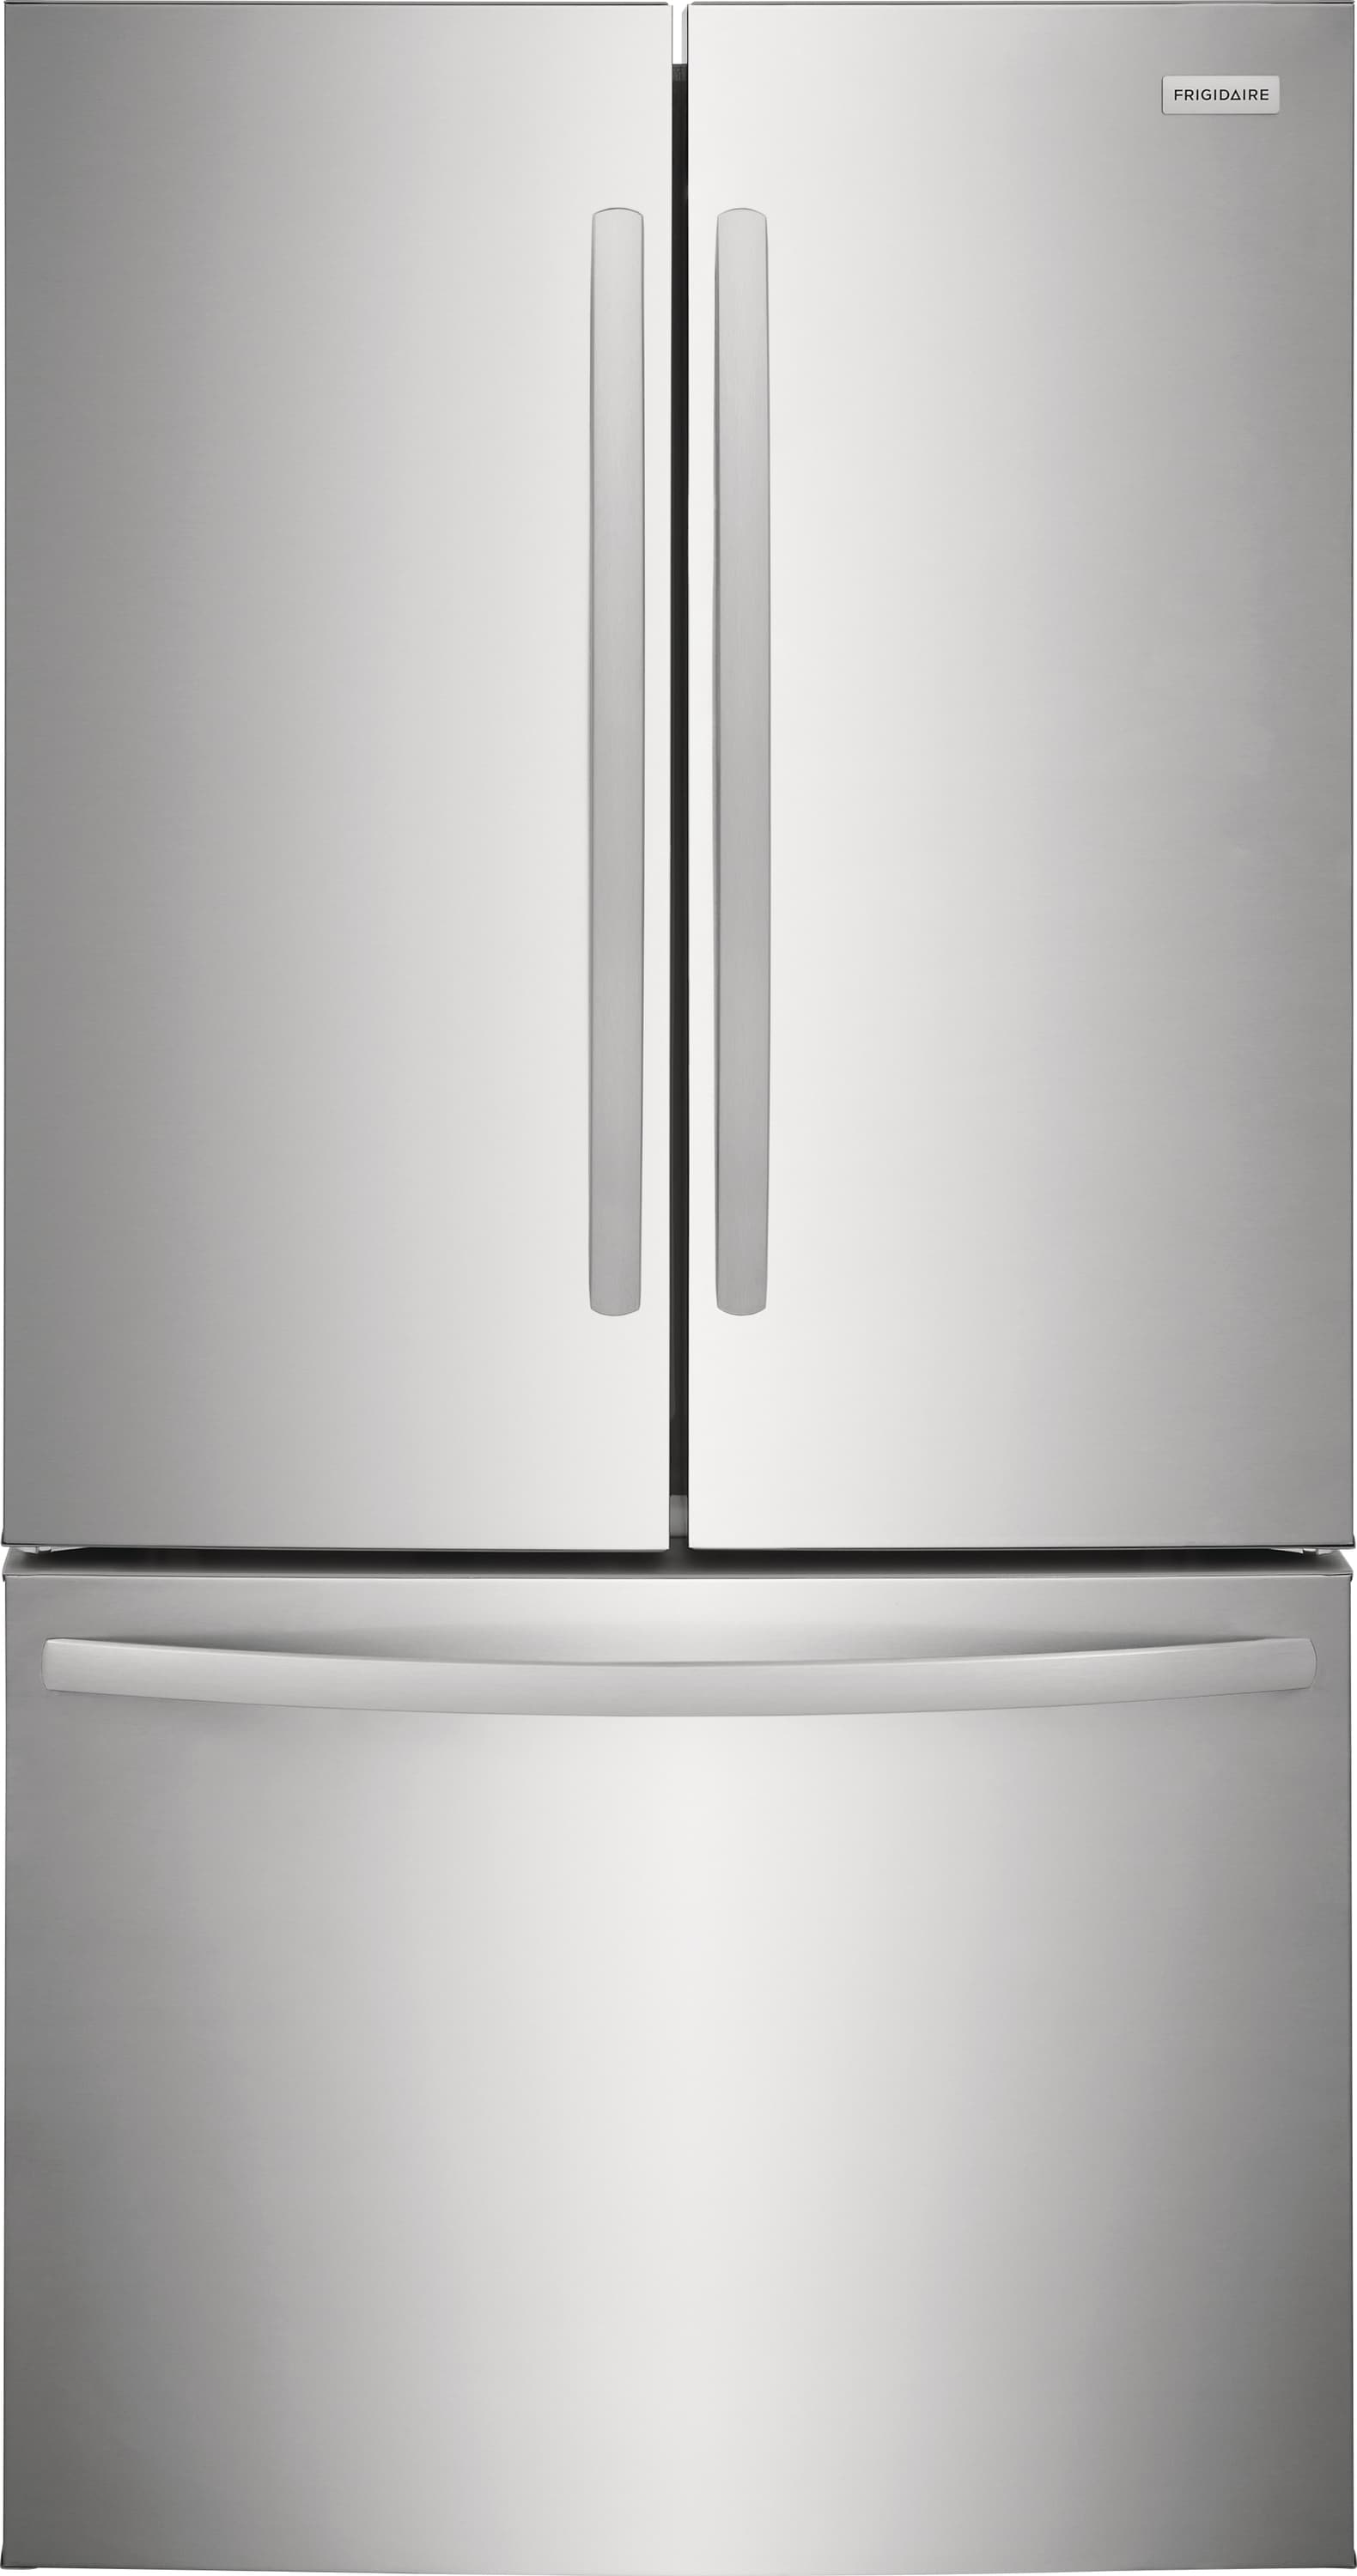 IMKFD28A in White by Frigidaire in Bangor, ME - Frigidaire French